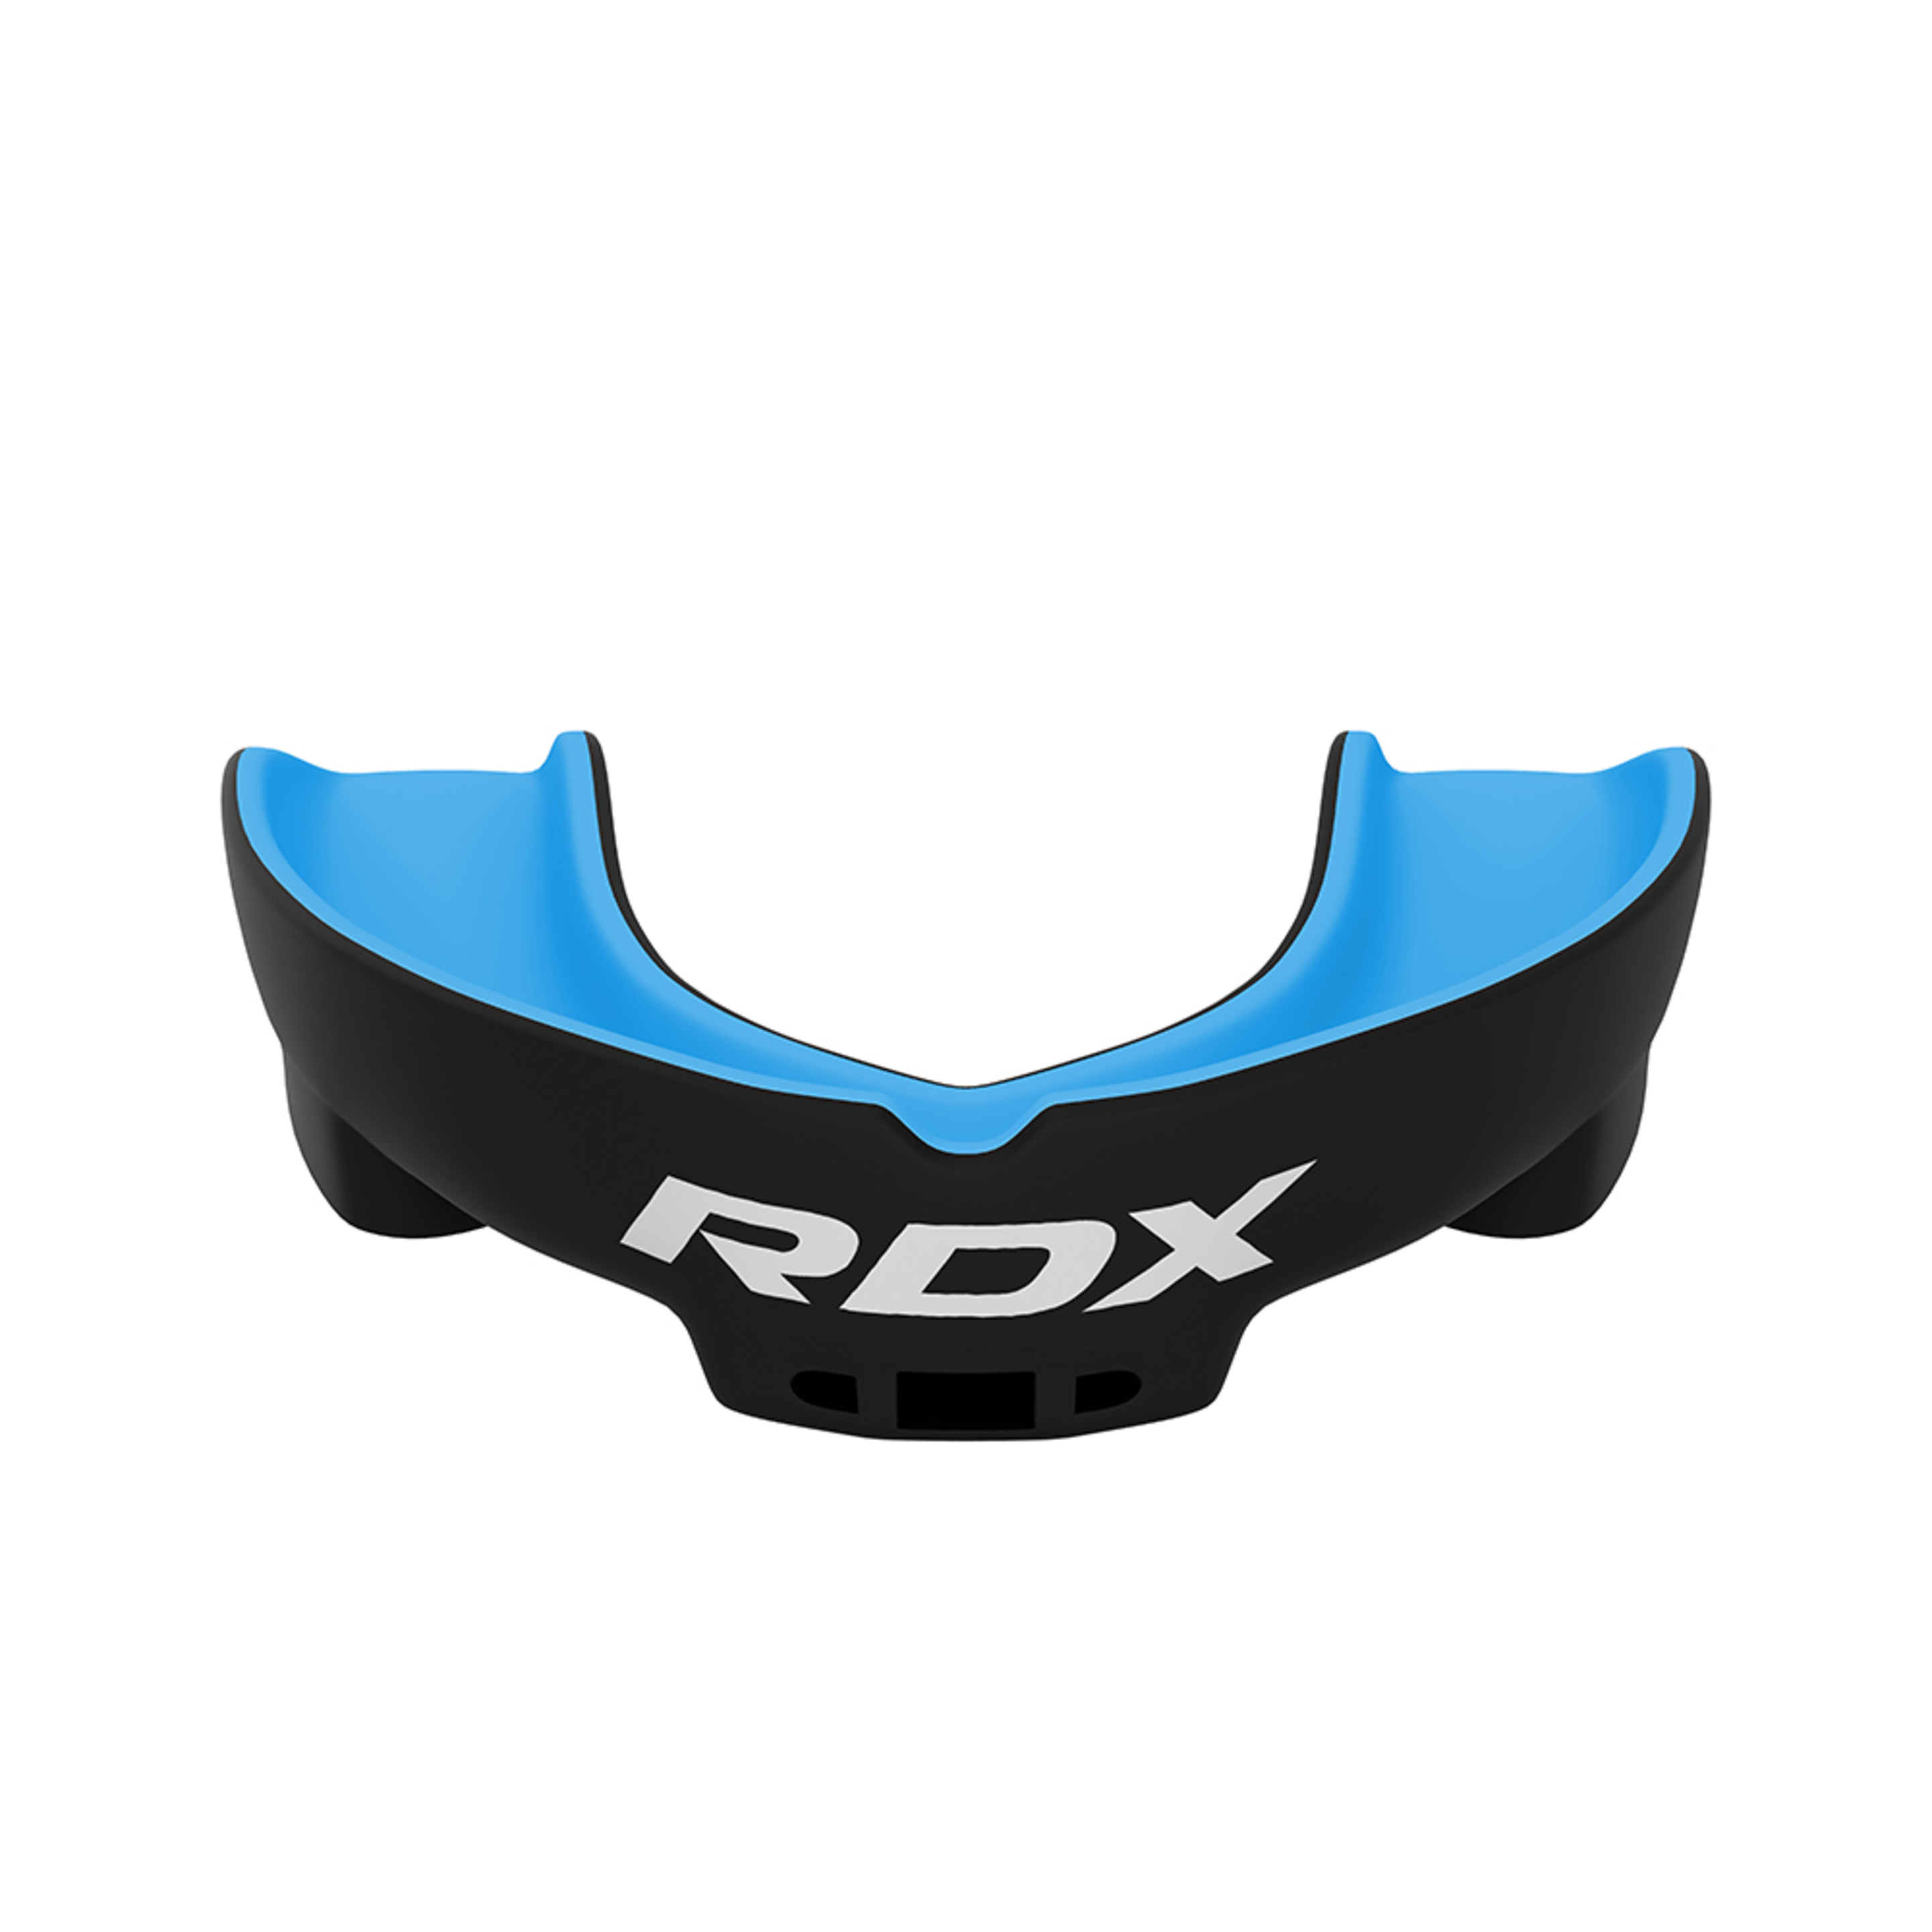 Protectores Bucales Rdx Ggs-3